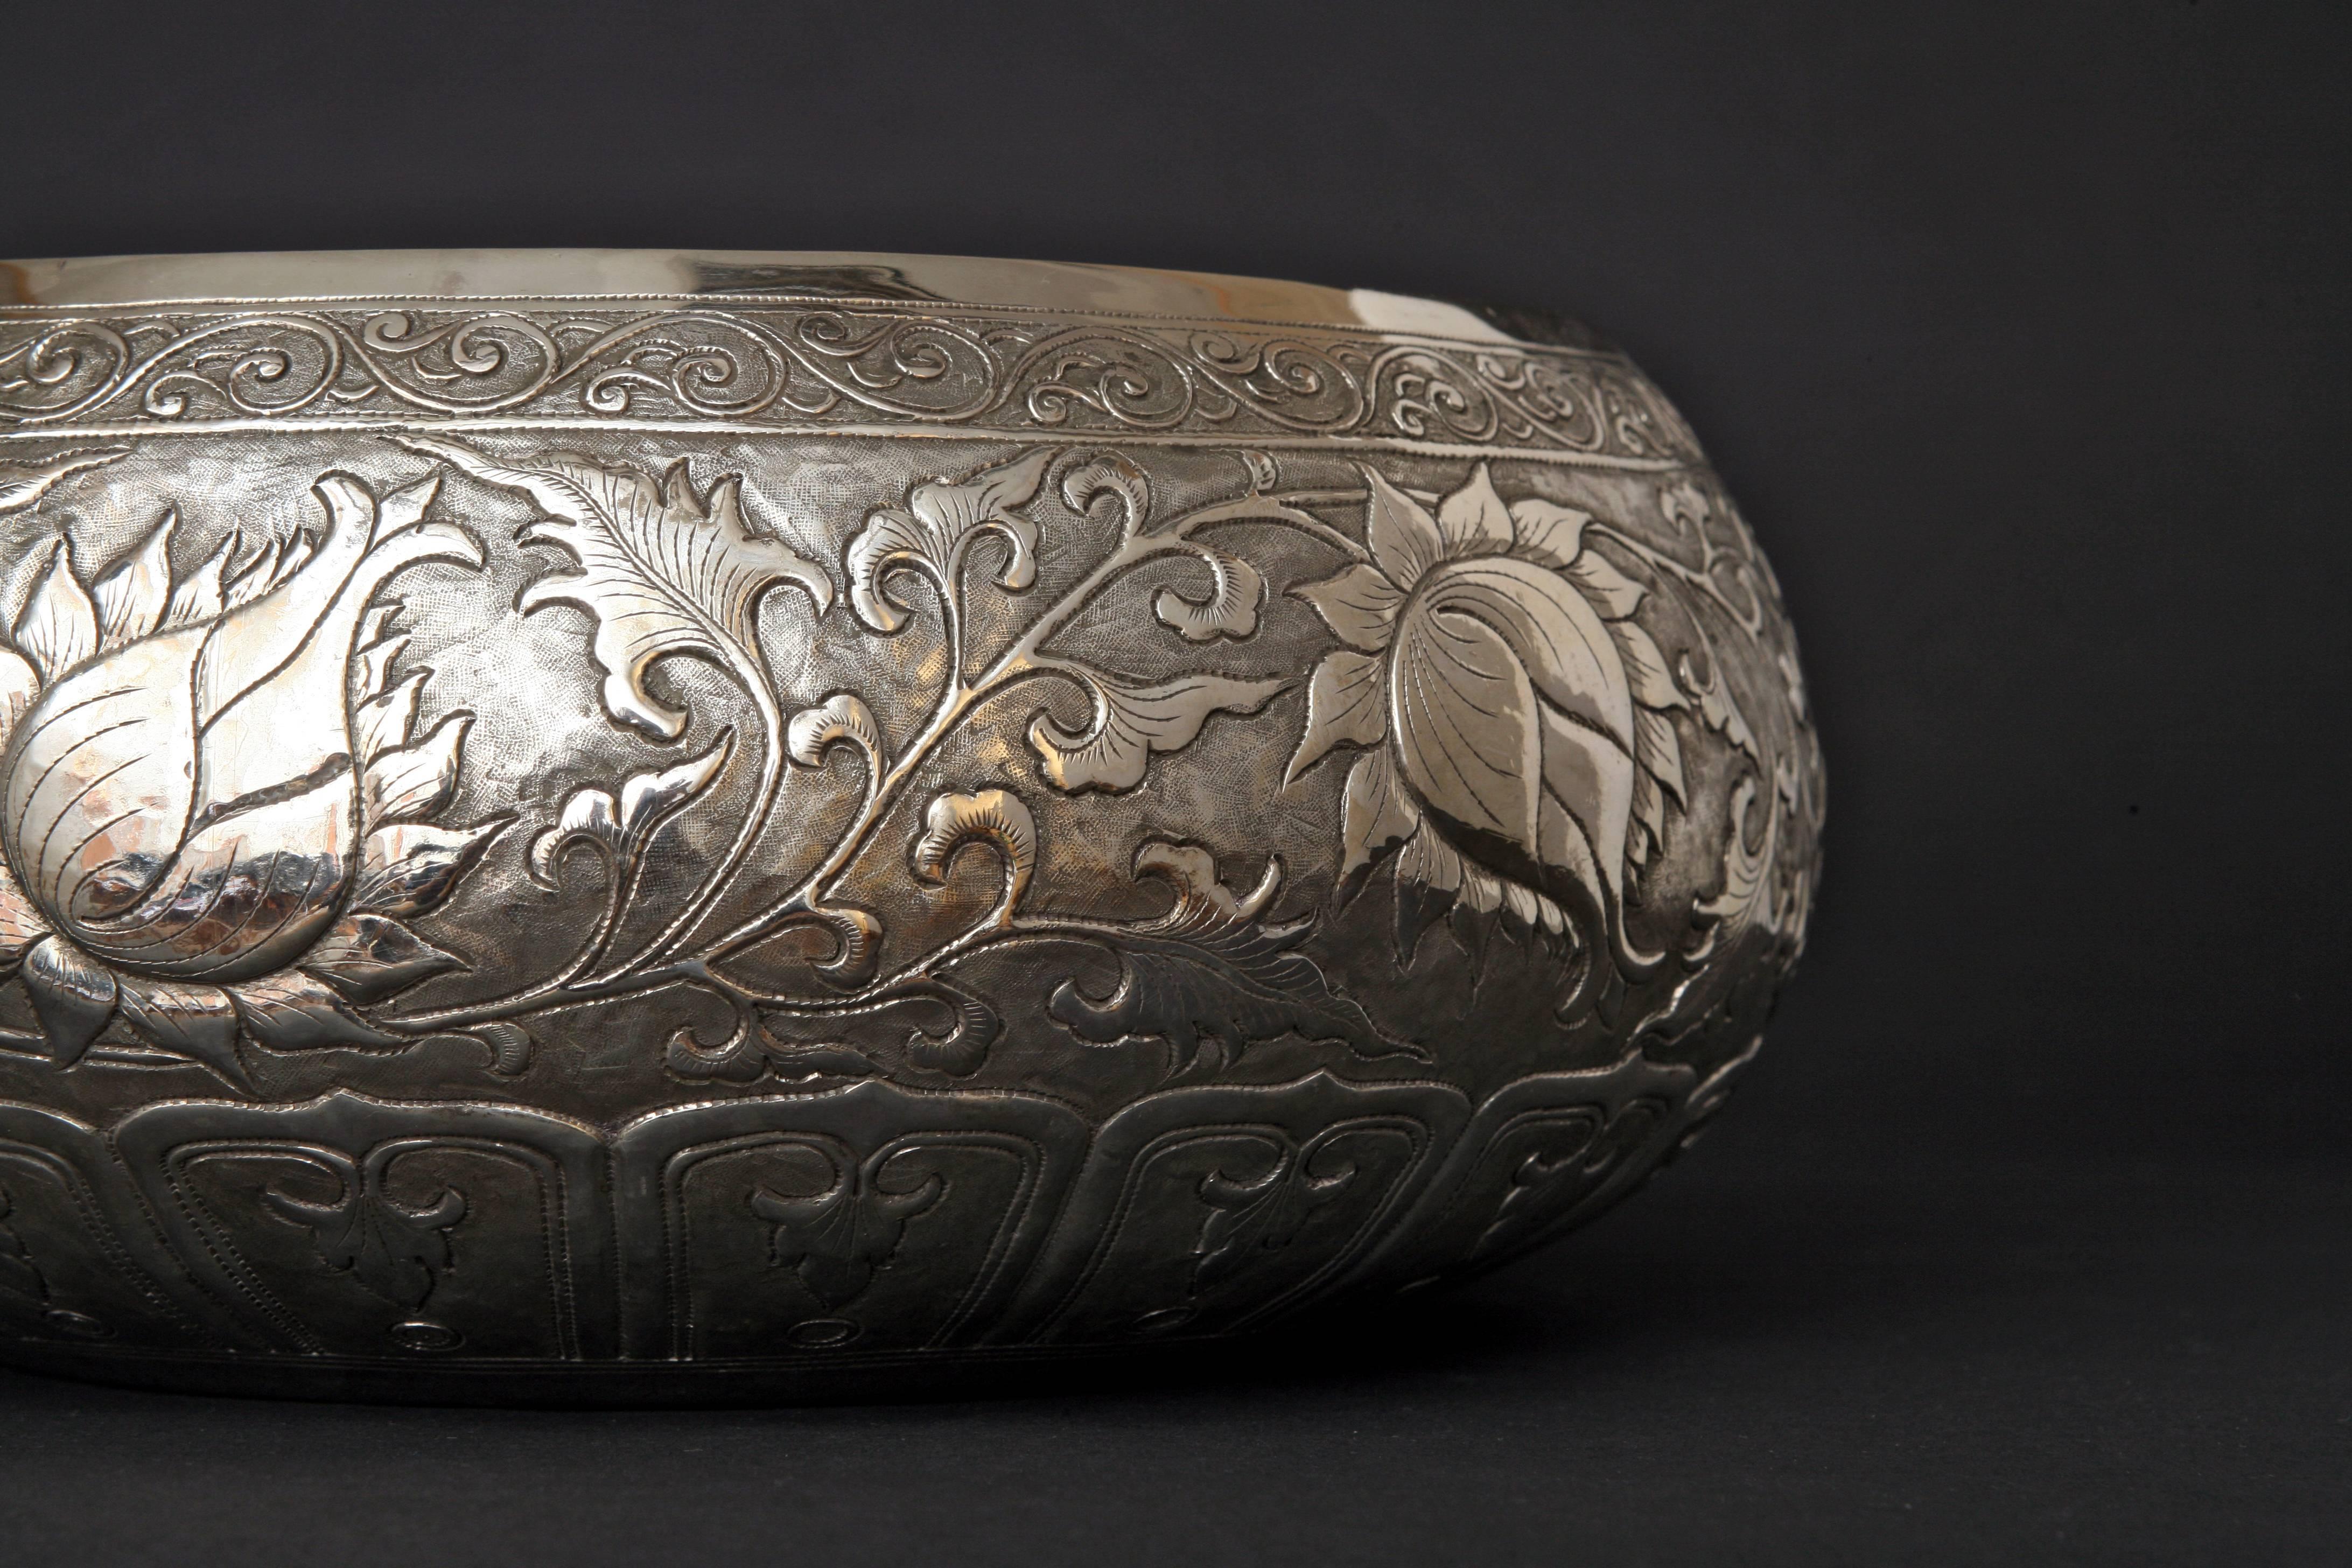 The fine hand-worked solid silver bowl is meticulously chased with Chinese lotus motif, and available in other sizes.
The silver is 90% pure.